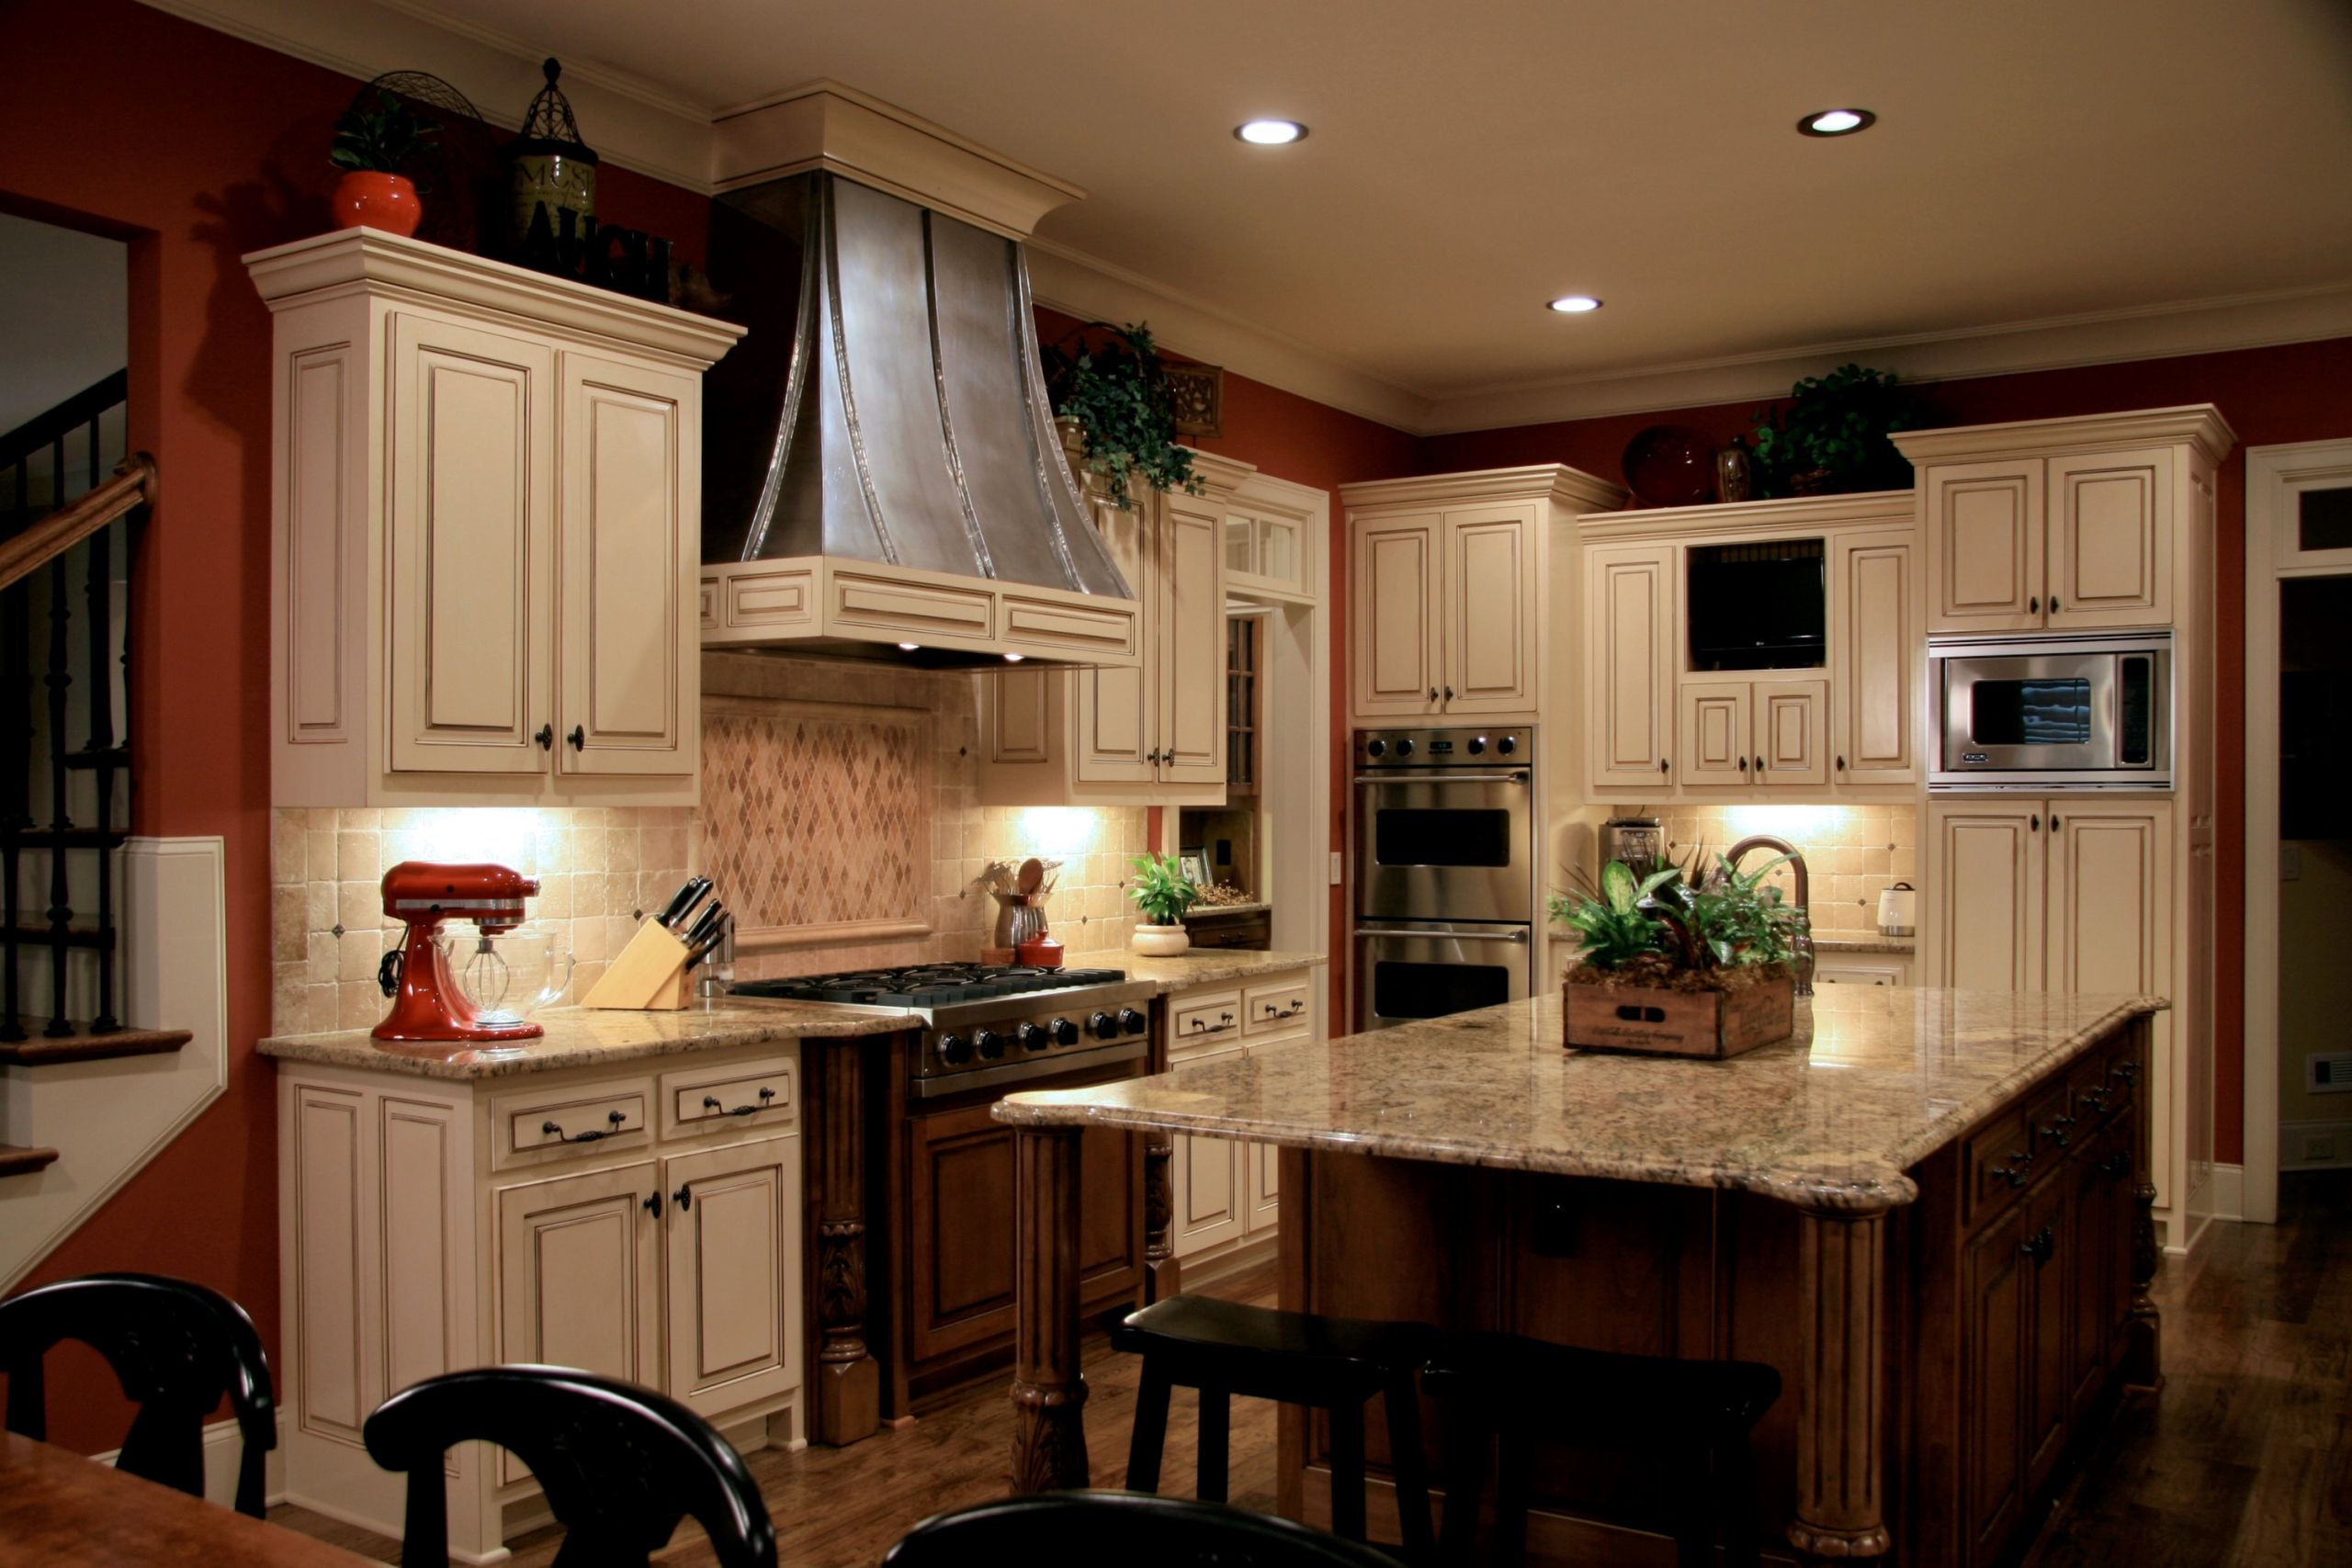 Kitchen Ceiling Light Fixtures
 Install recessed lighting in a kitchen